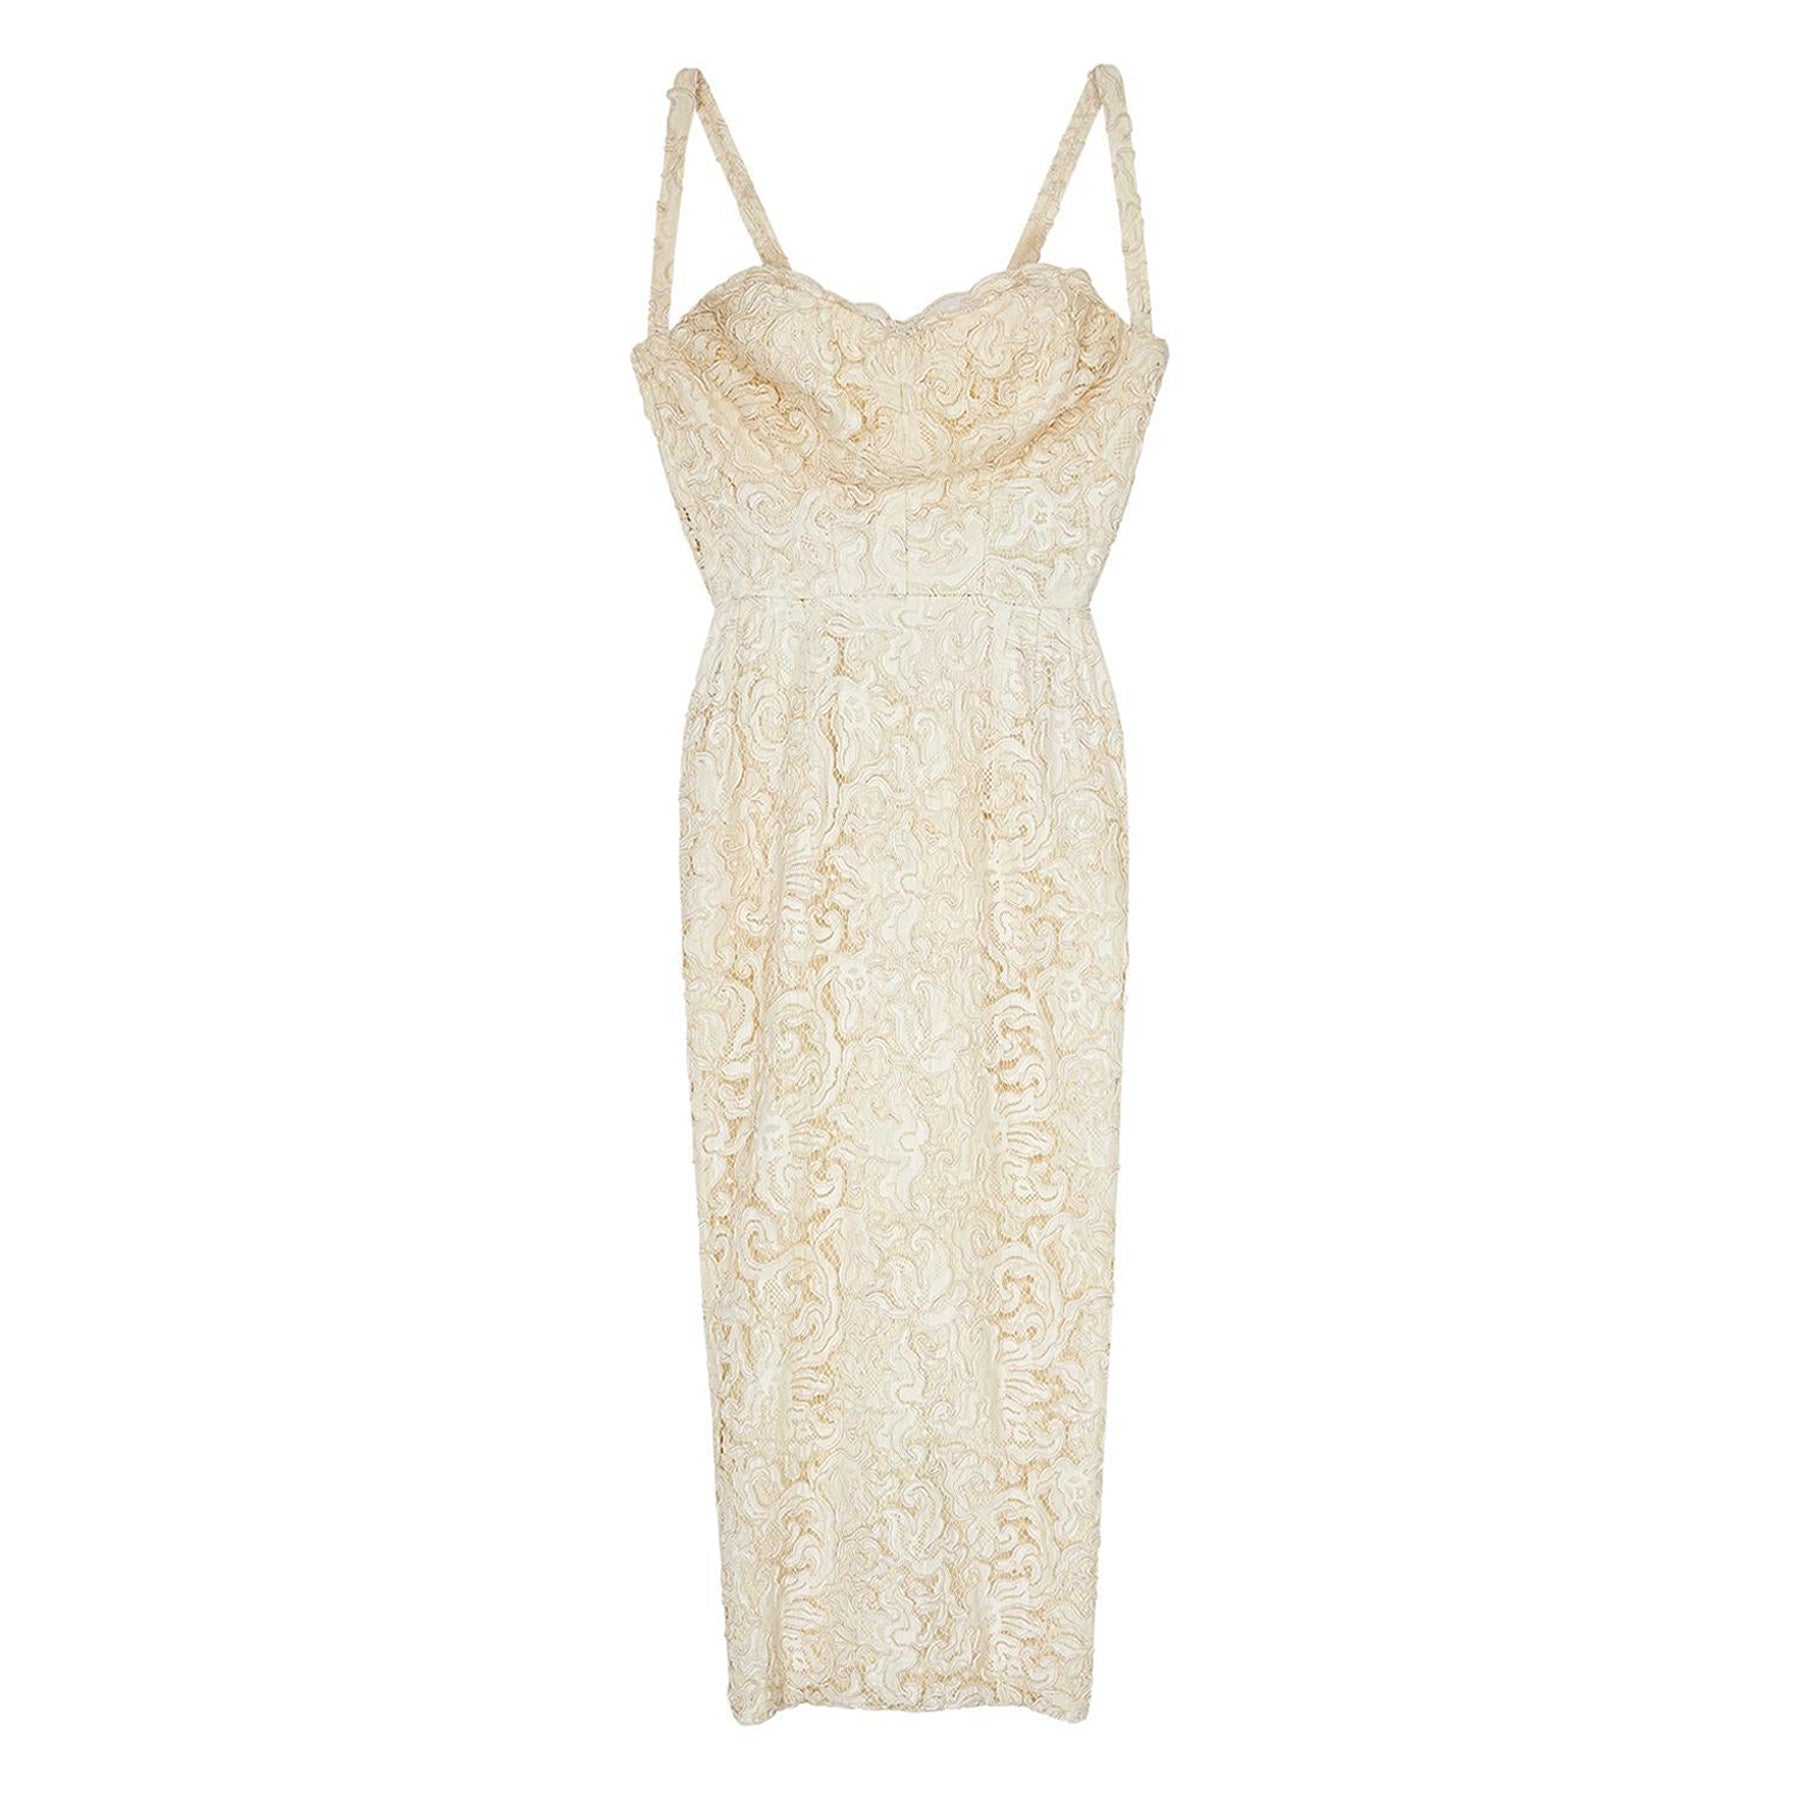 1950s French Haute Couture Cream Lace Bustier Dress For Sale